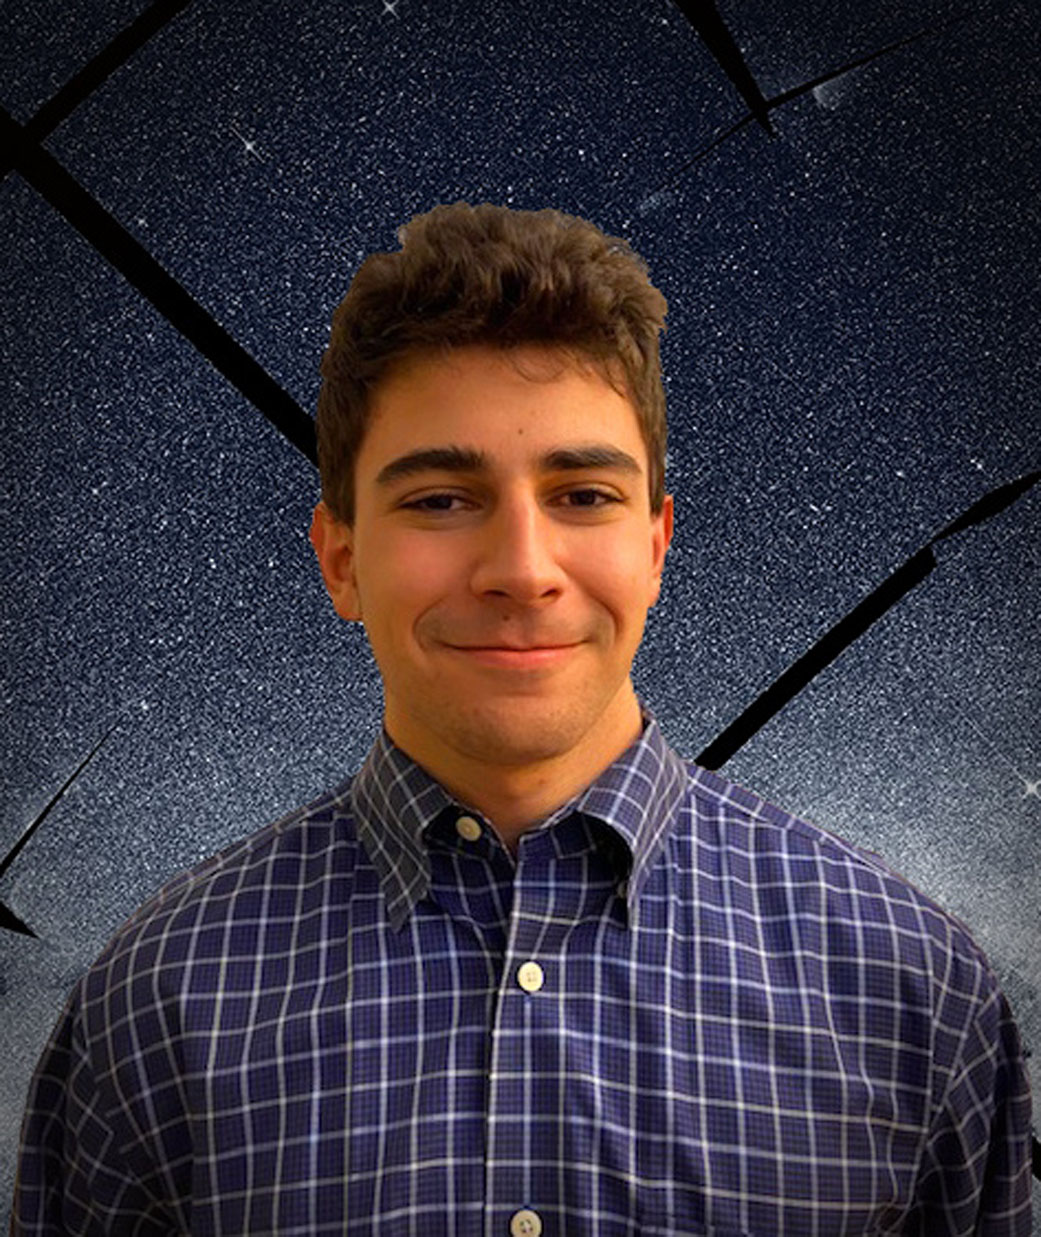 Intern Adam Freidman, male with brown hair wearing a blue checkered shirt,  stands in front of a TESS image of a night sky with billions of stars. 